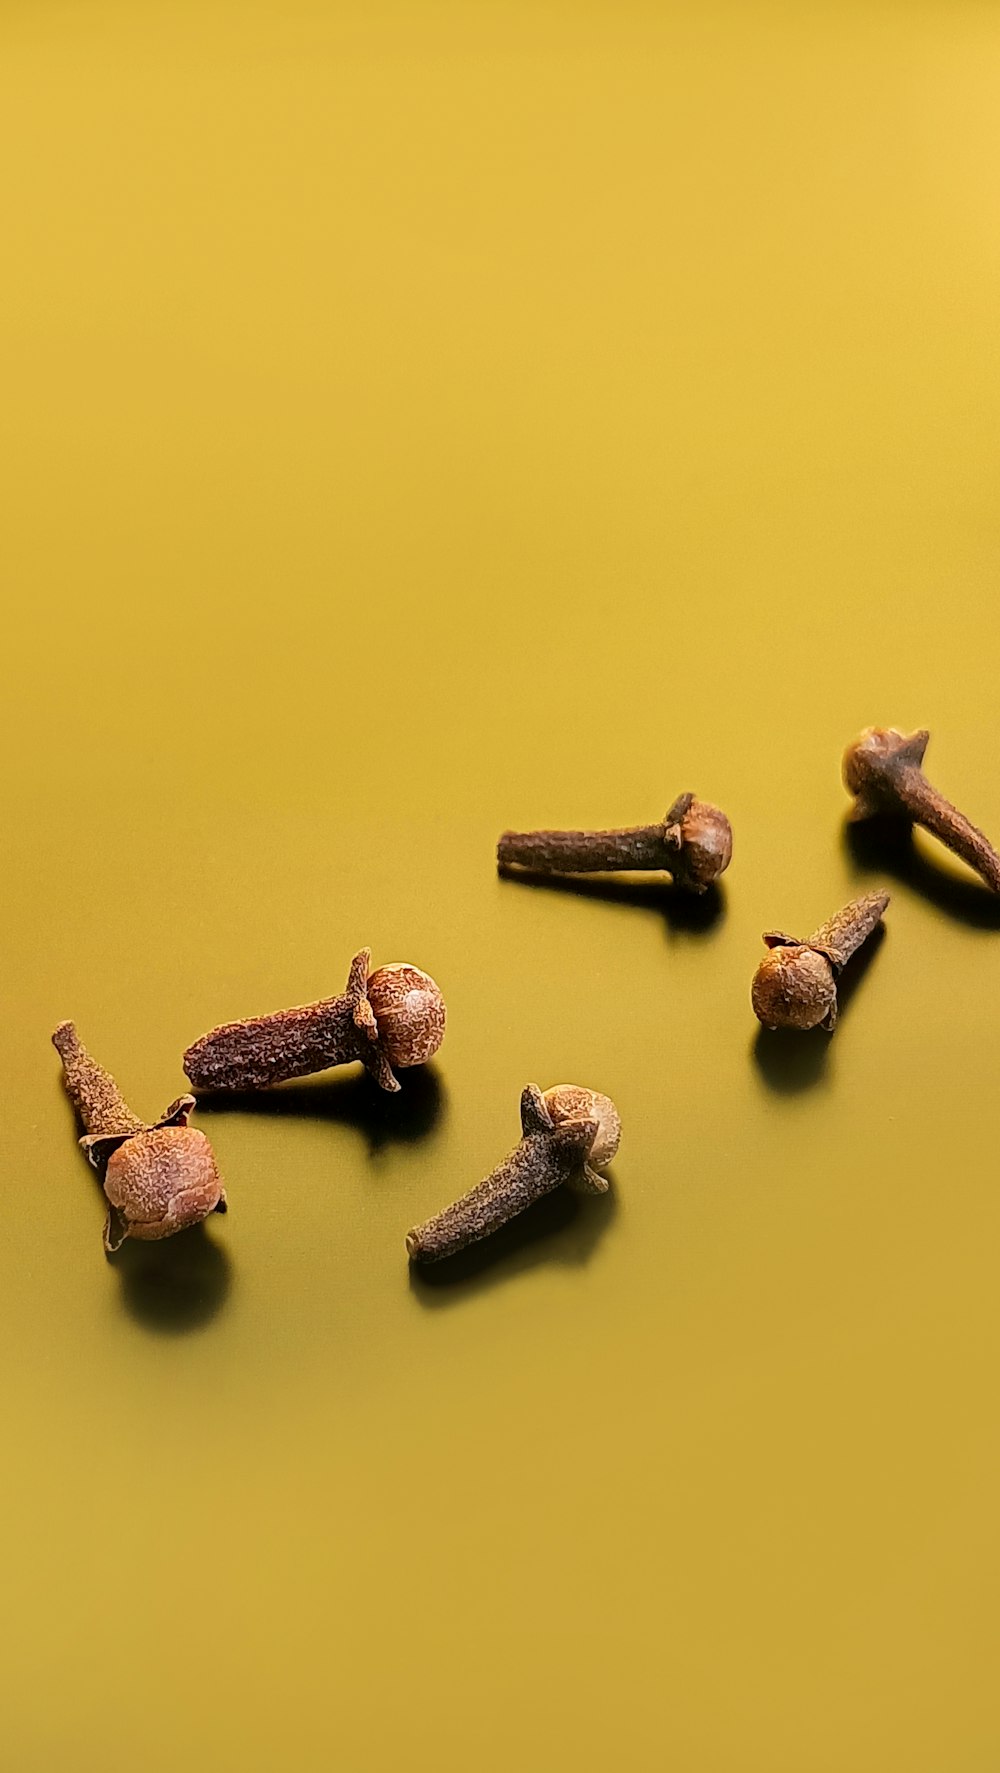 a group of nuts on a yellow surface